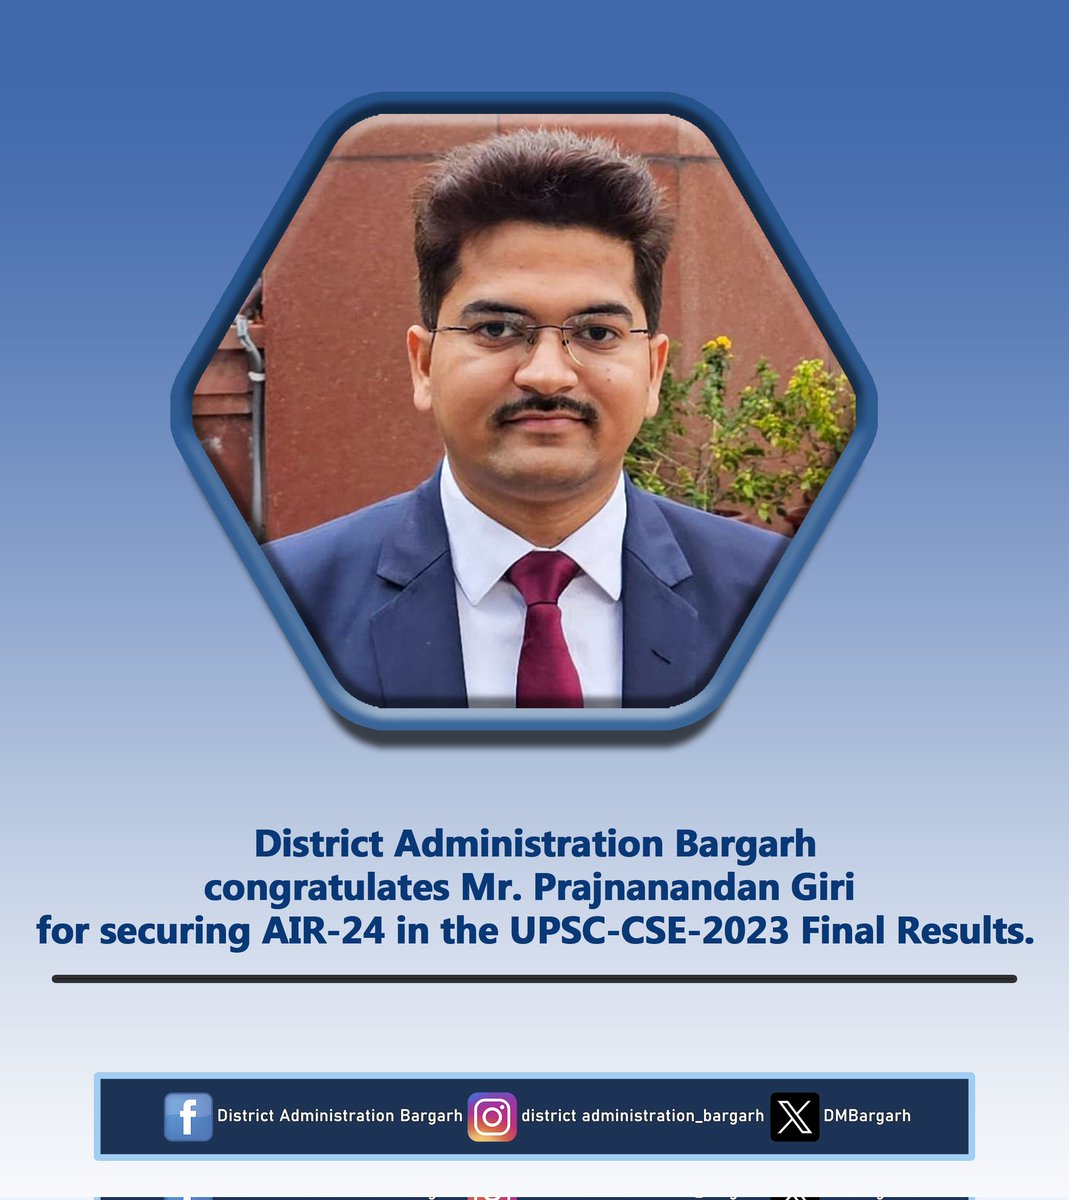 District Administration Bargarh congratulates Mr. Prajnanandan Giri for securing AIR-24 in the UPSC-CSE-2023 Final Results.